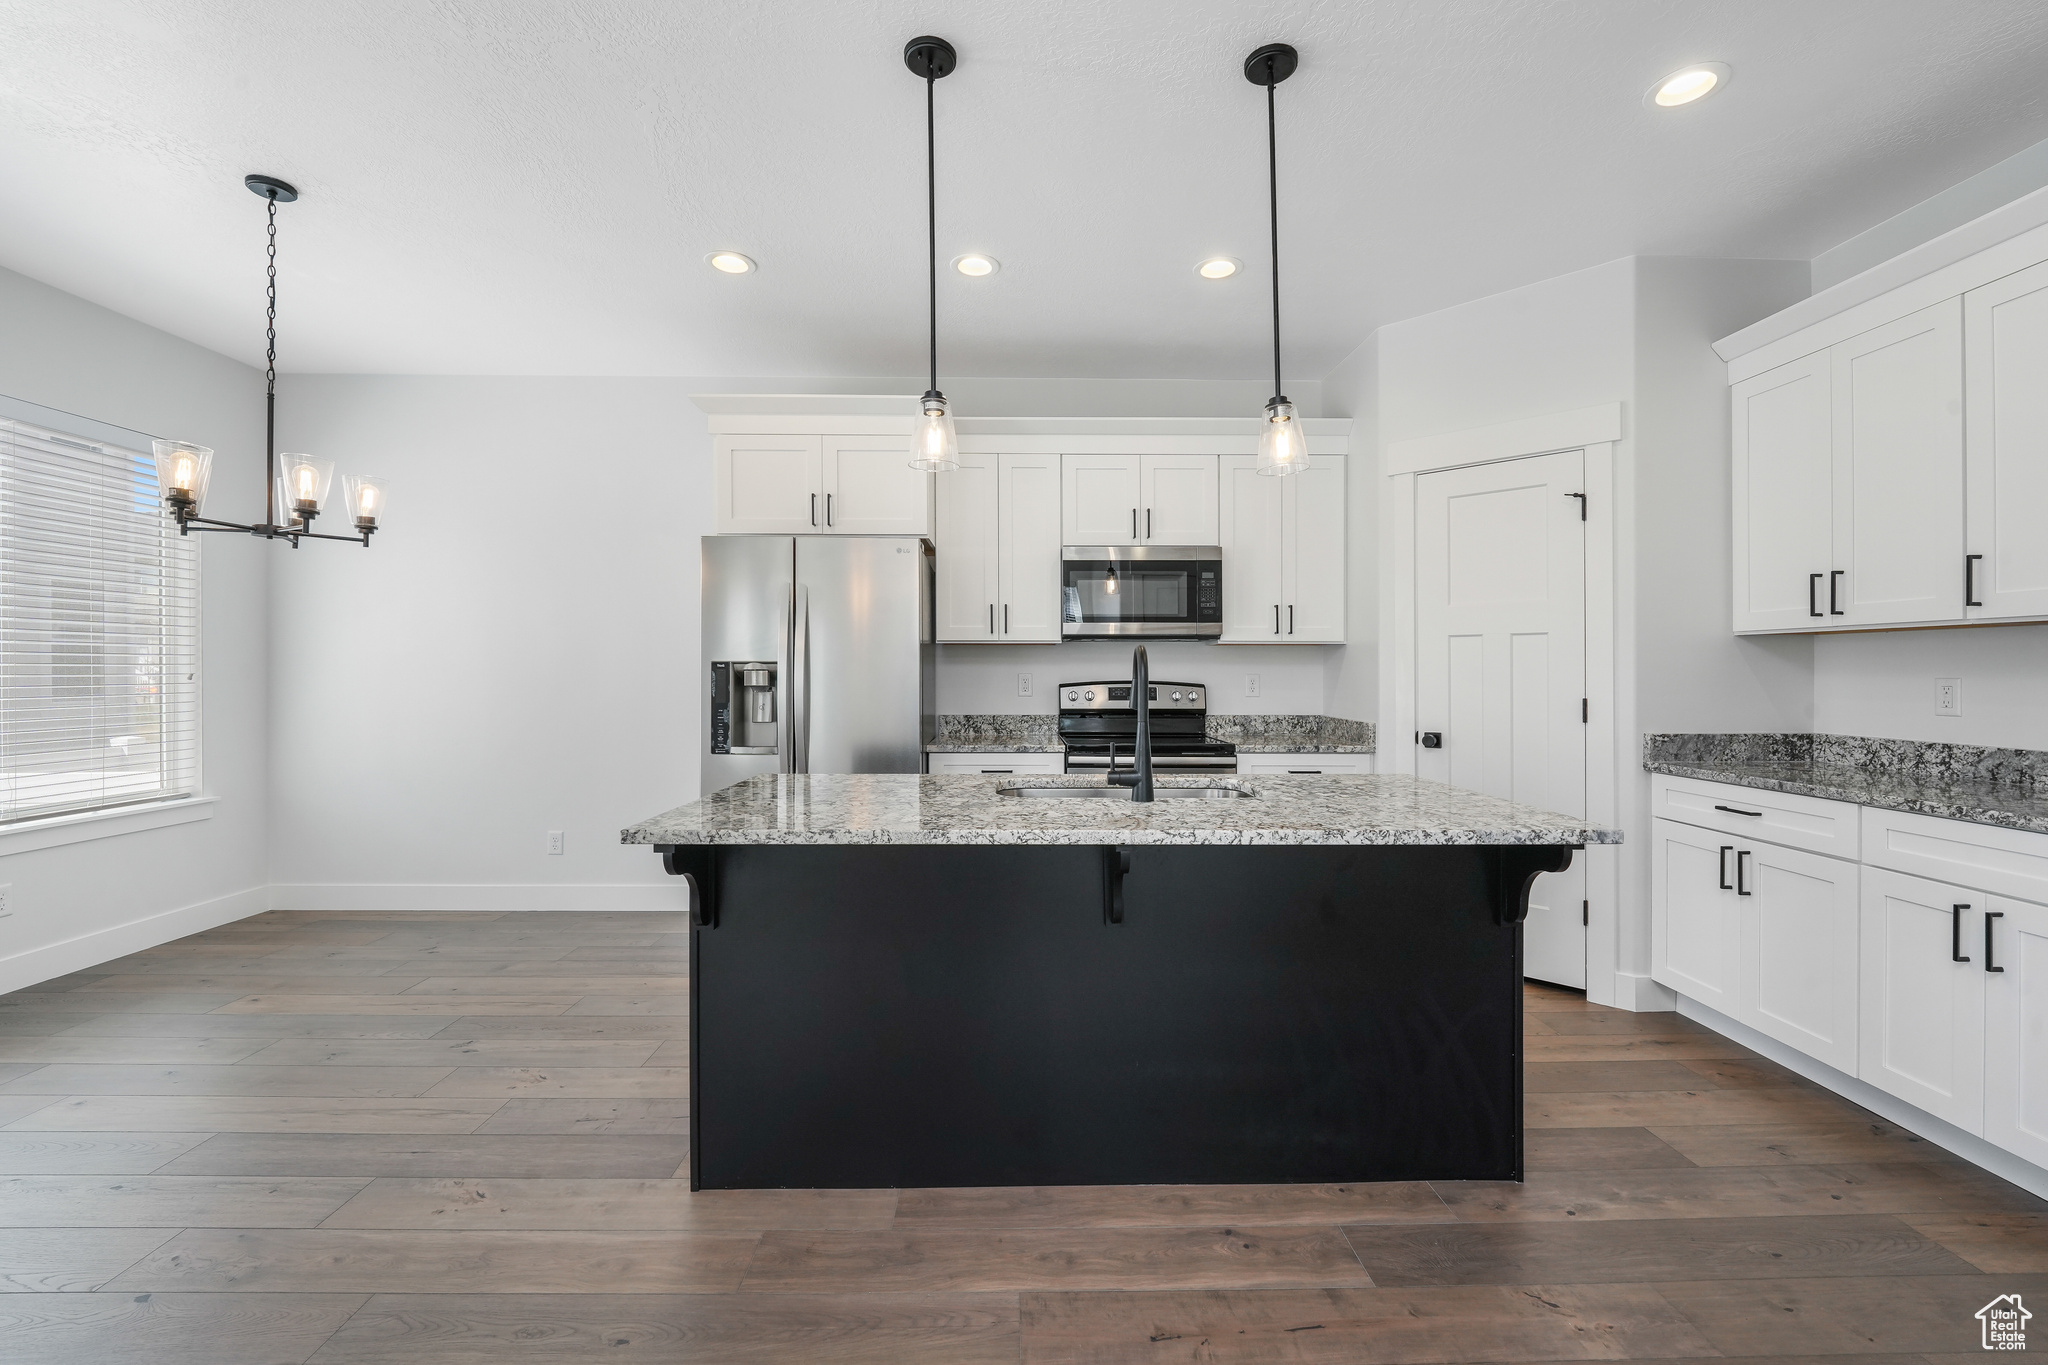 Kitchen with hanging light fixtures, stainless steel appliances, and dark hardwood / wood-style flooring